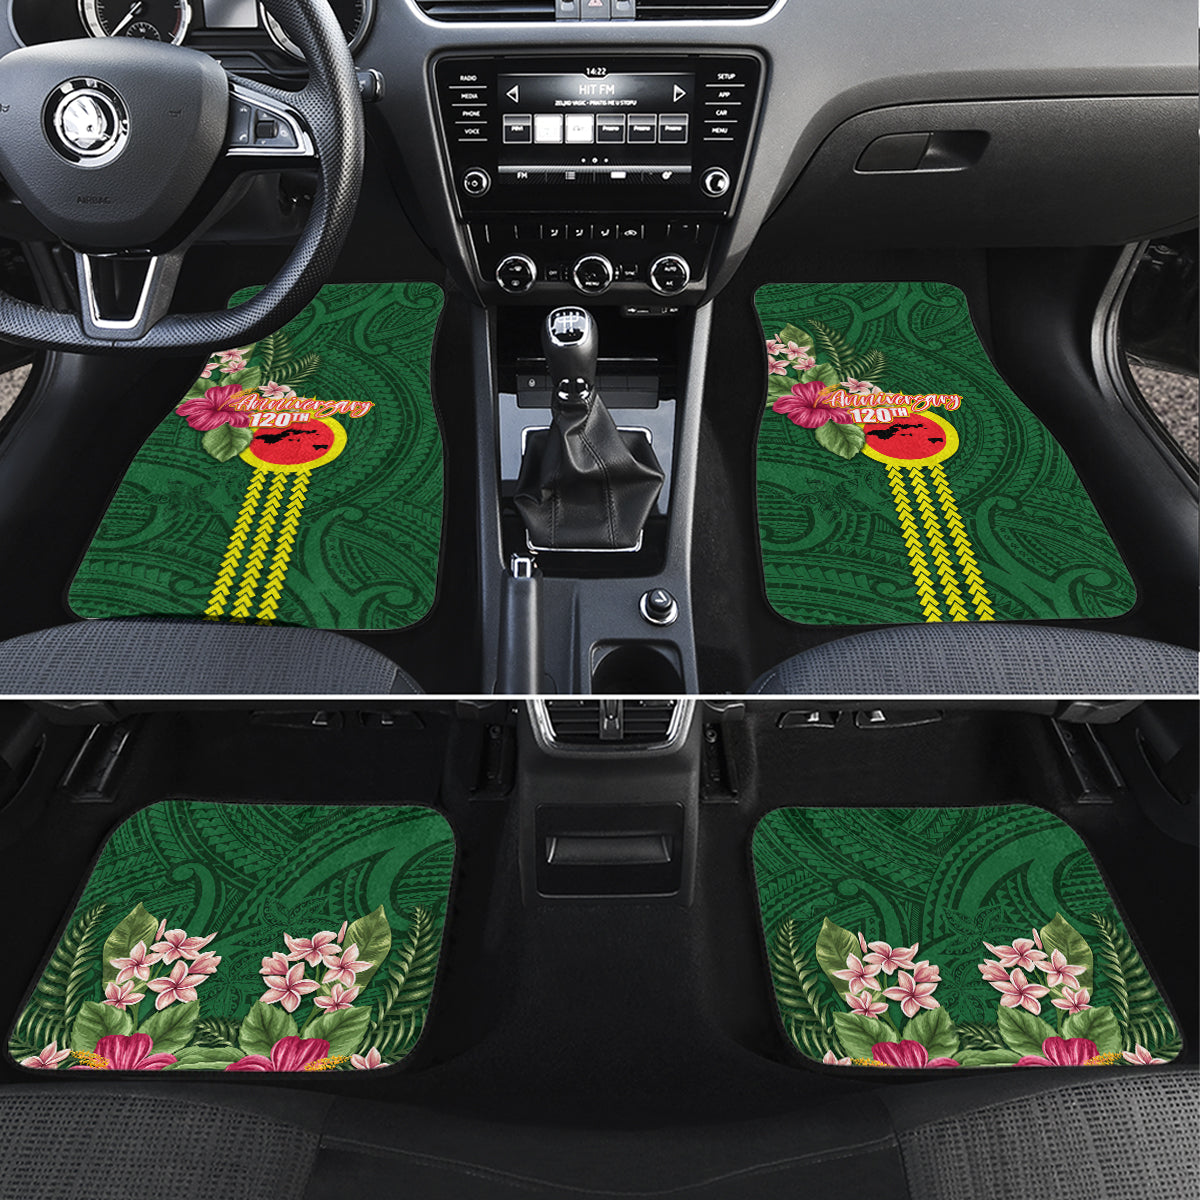 Manu'a Cession Day 120th Anniversary Car Mats Polynesian Pattern and Hibiscus Flower